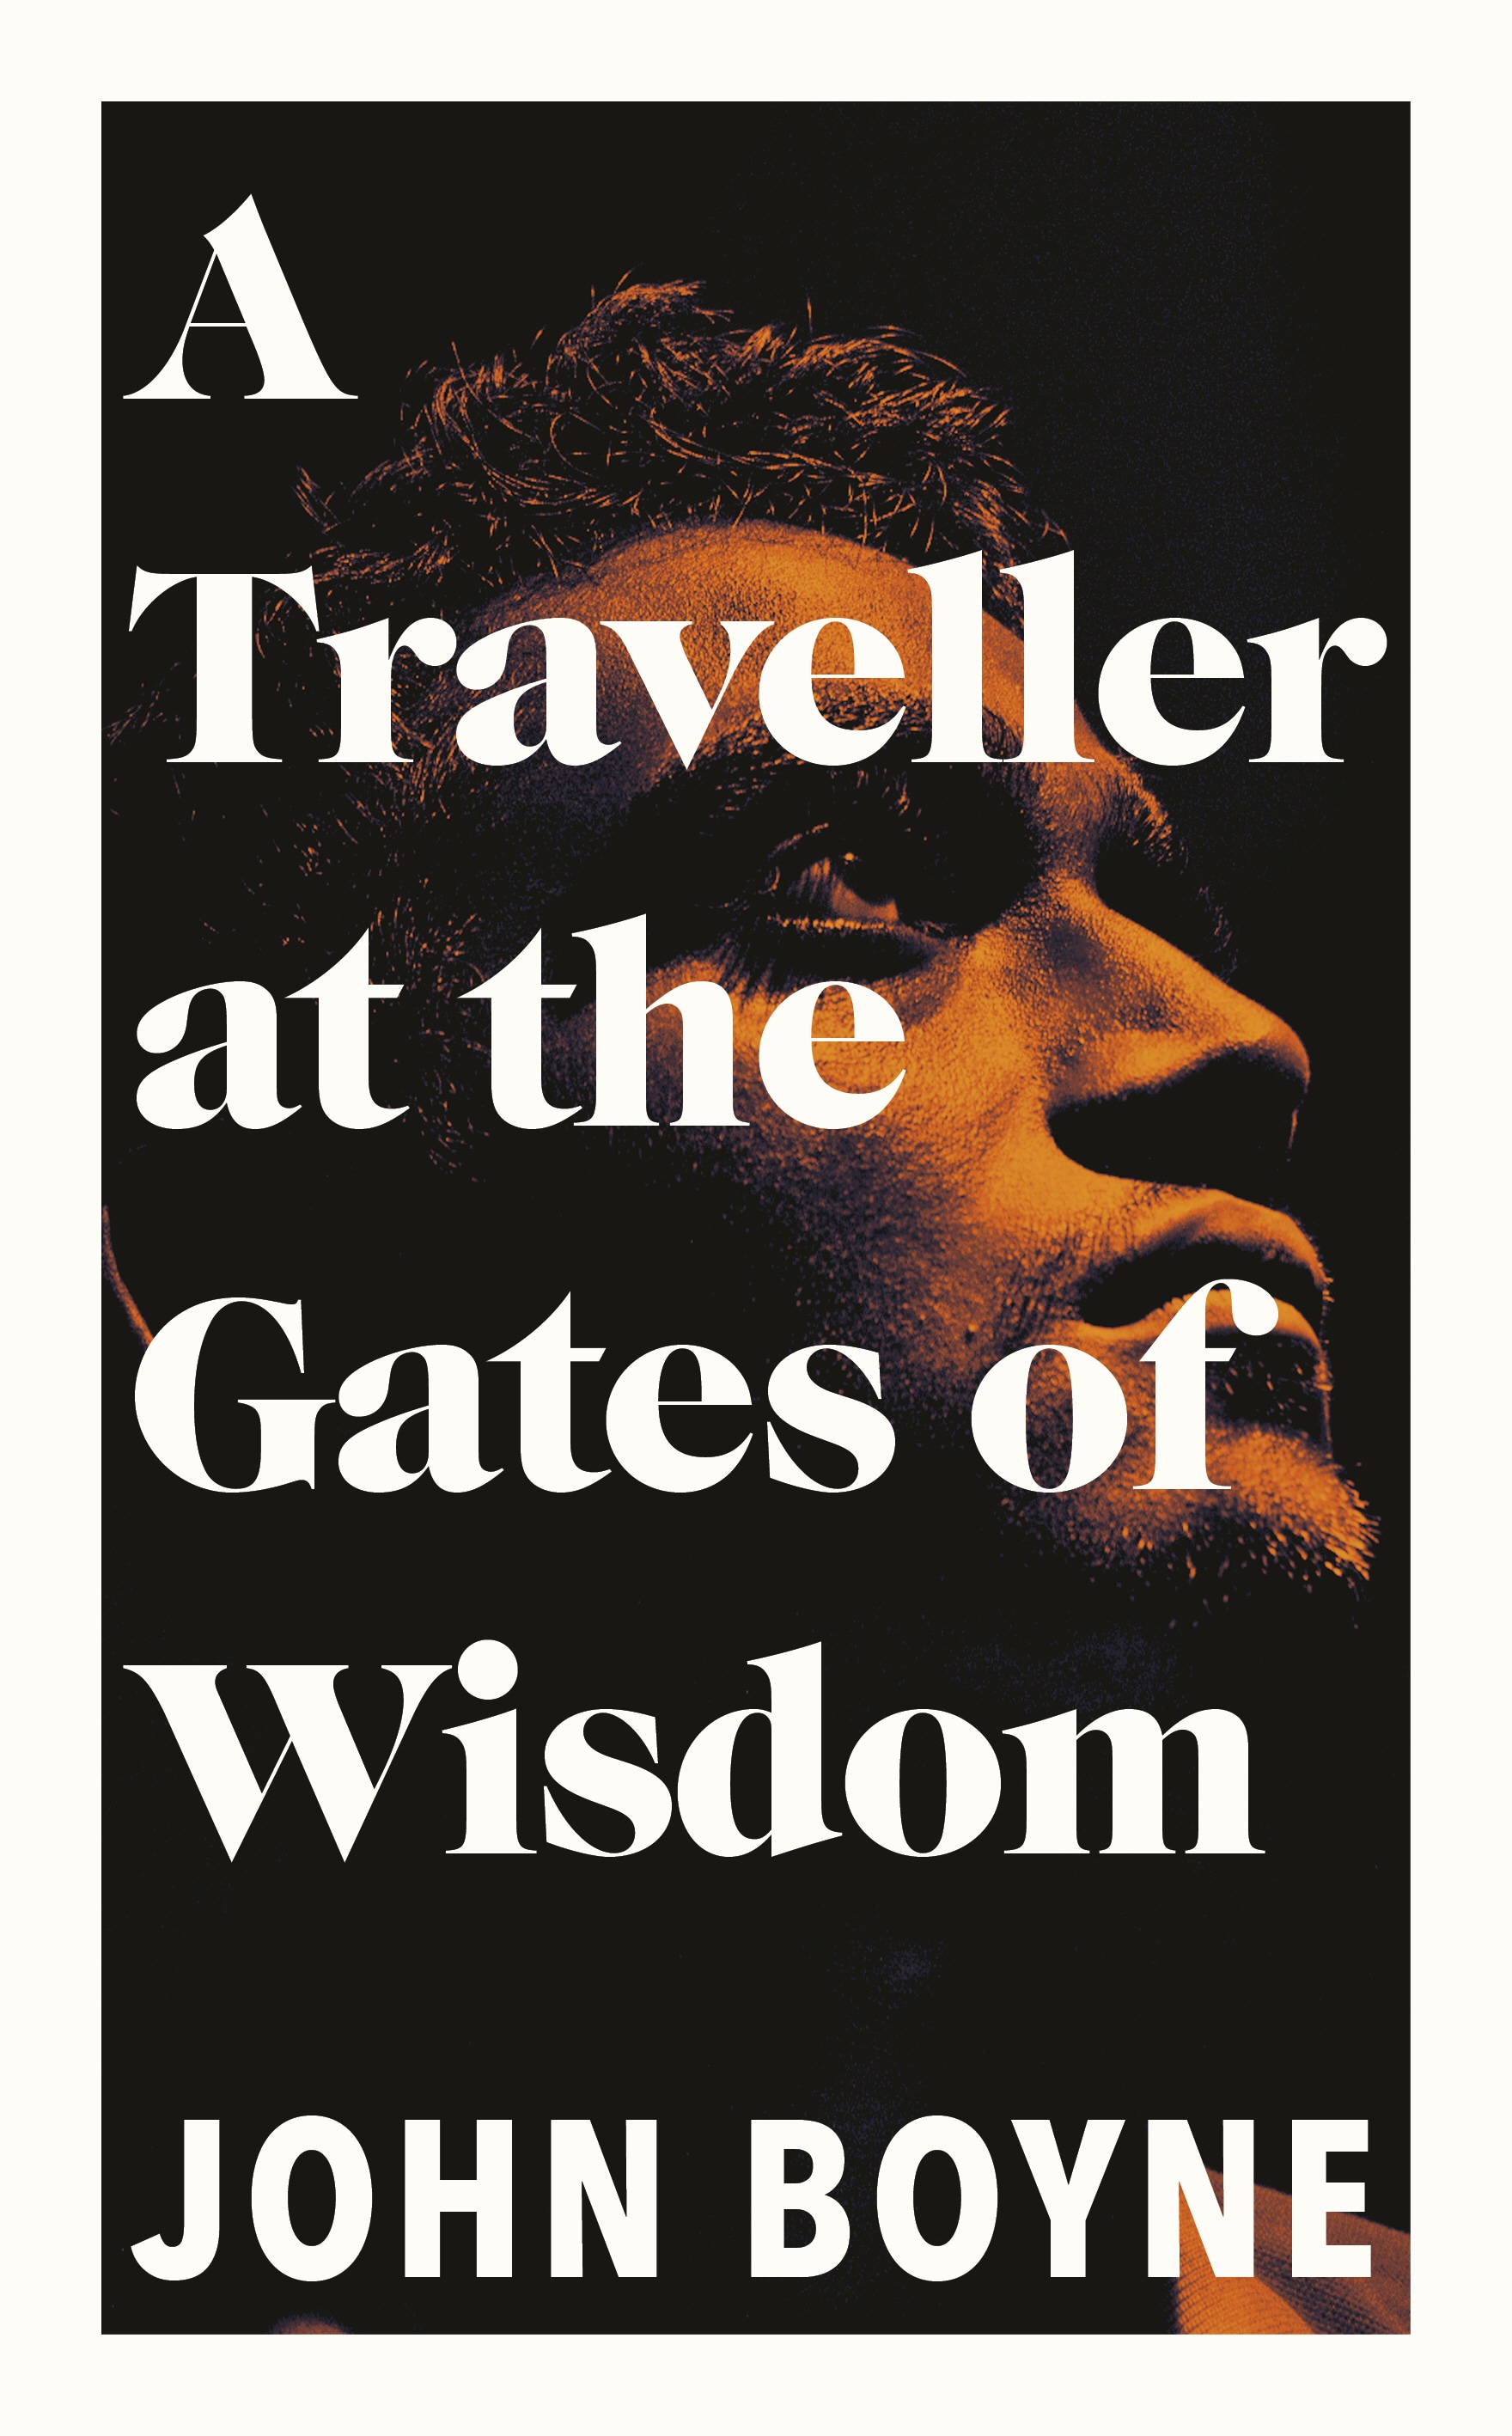 Book “A Traveller at the Gates of Wisdom” by John Boyne — July 23, 2020